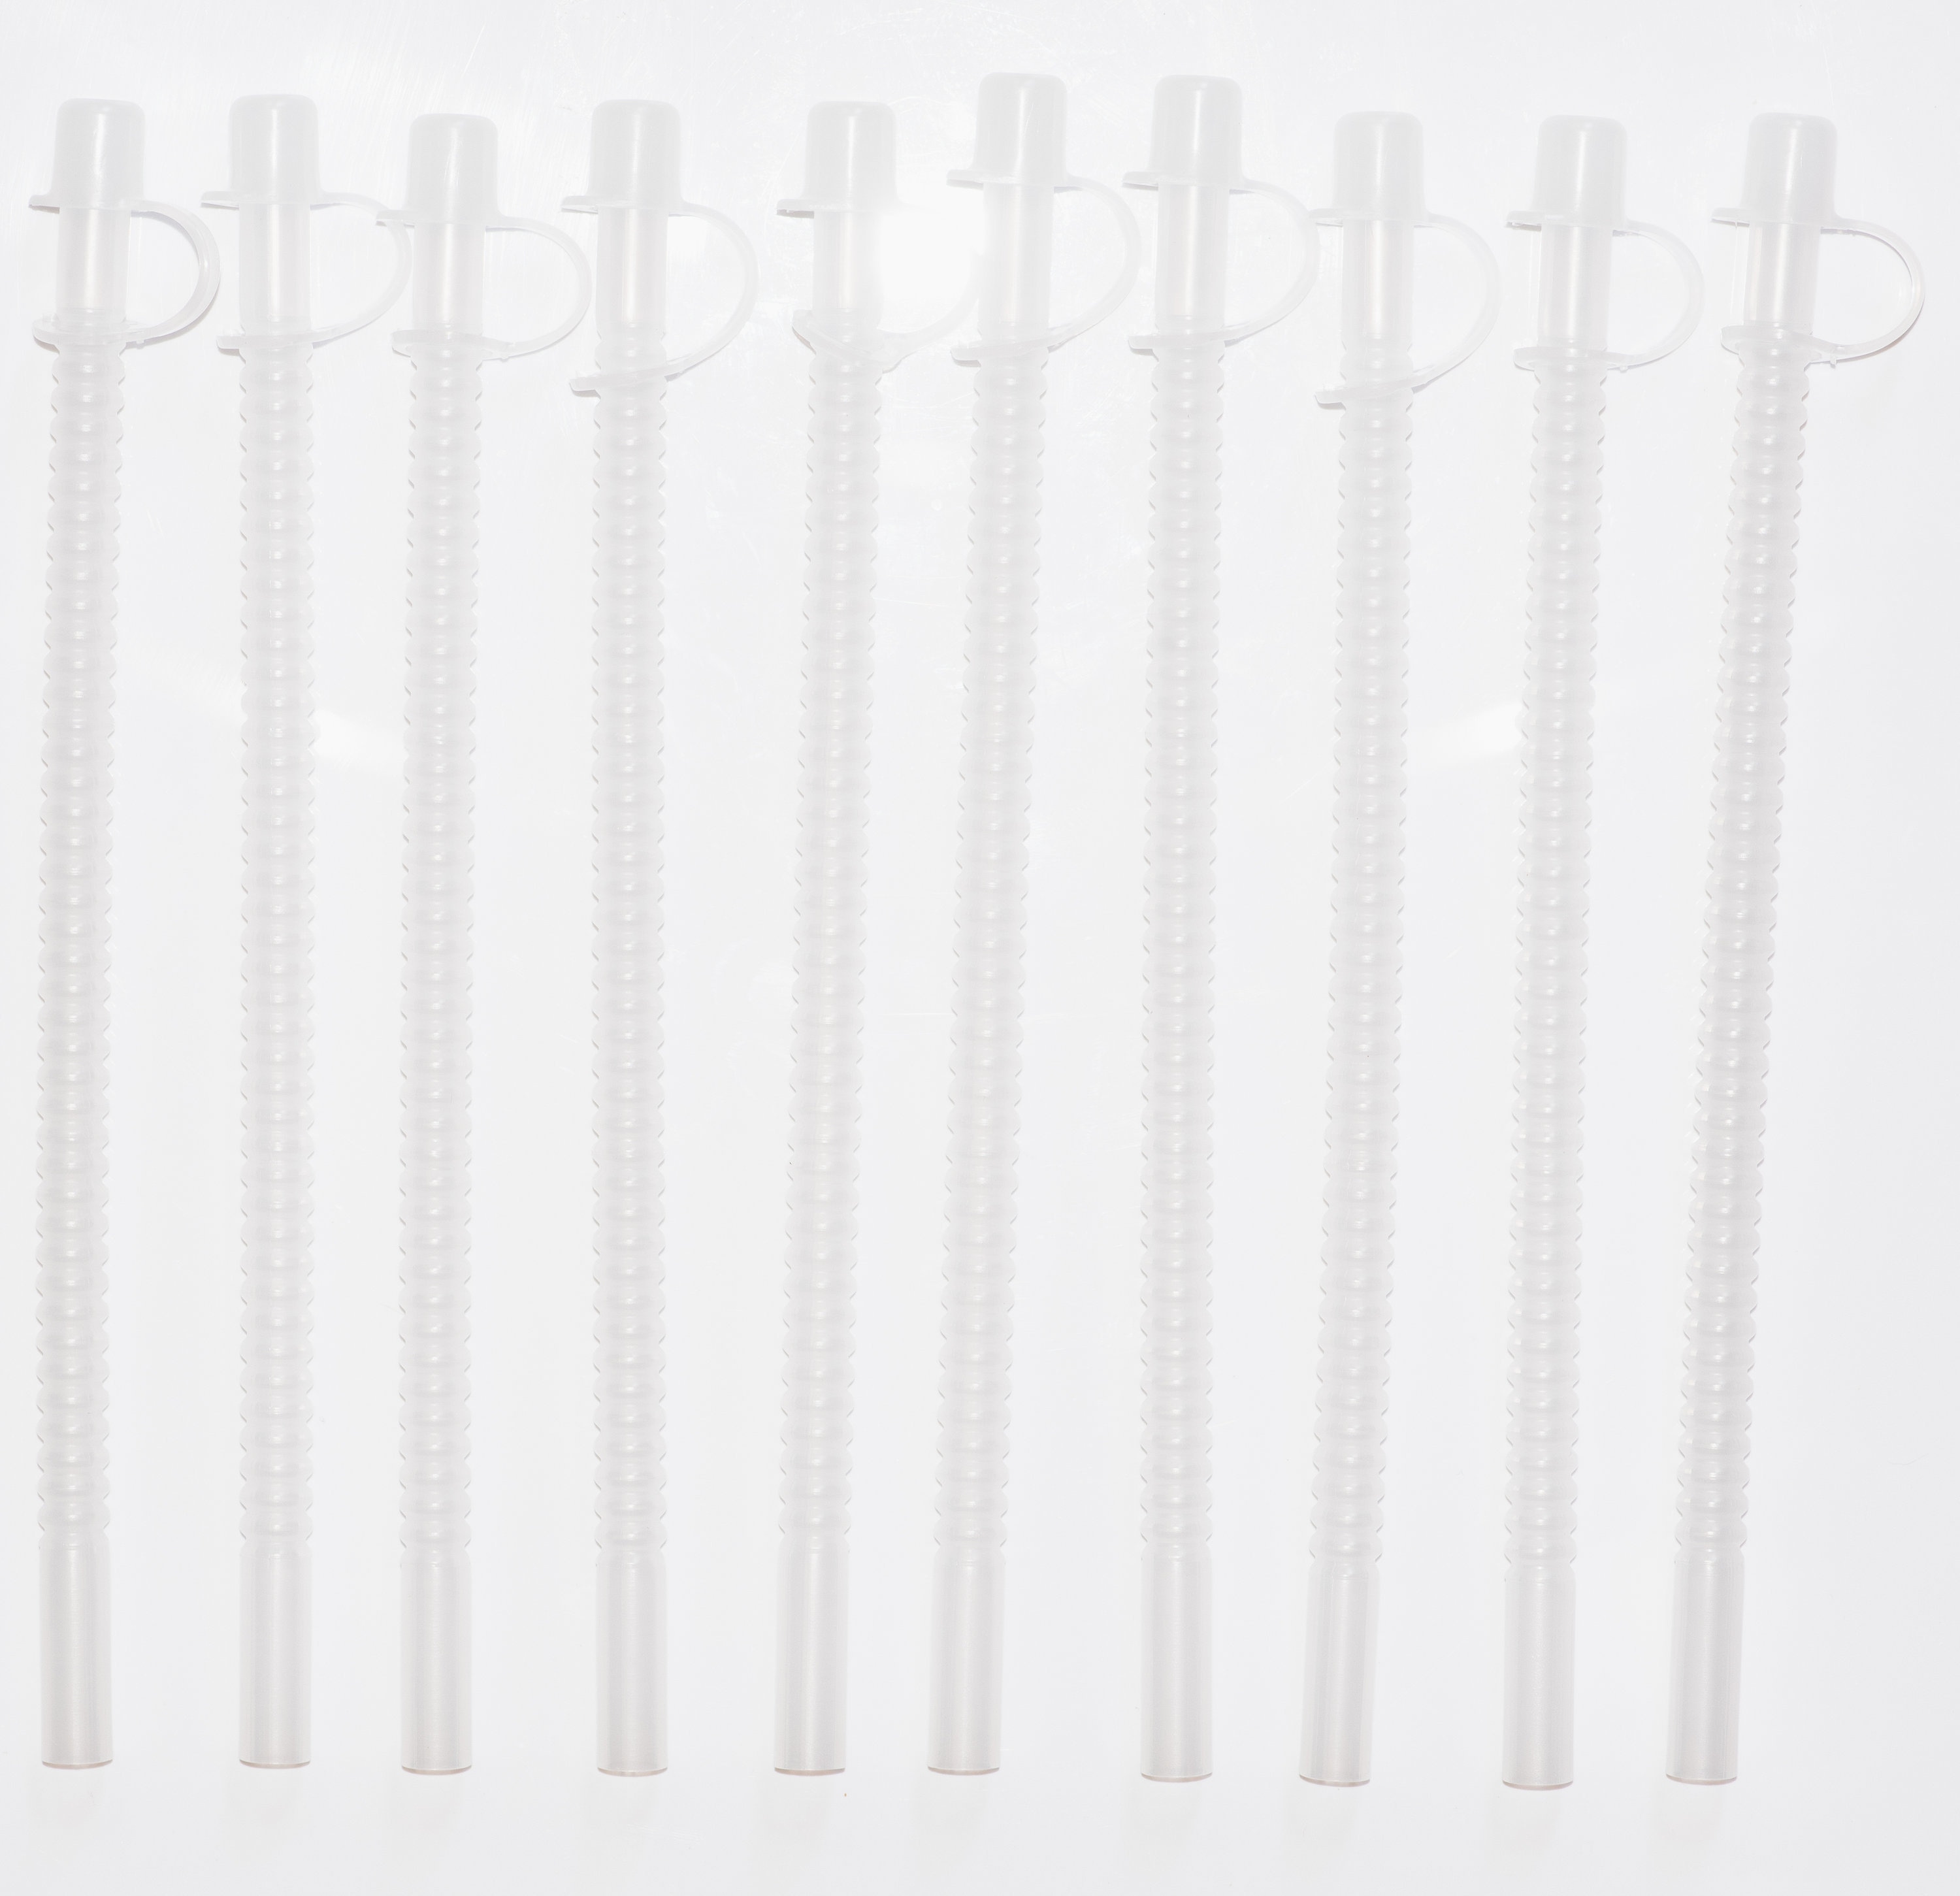 13 Inch Long Flexible Reusable Straws With Natural clear Straw Caps Set of  10 Free Shipping 